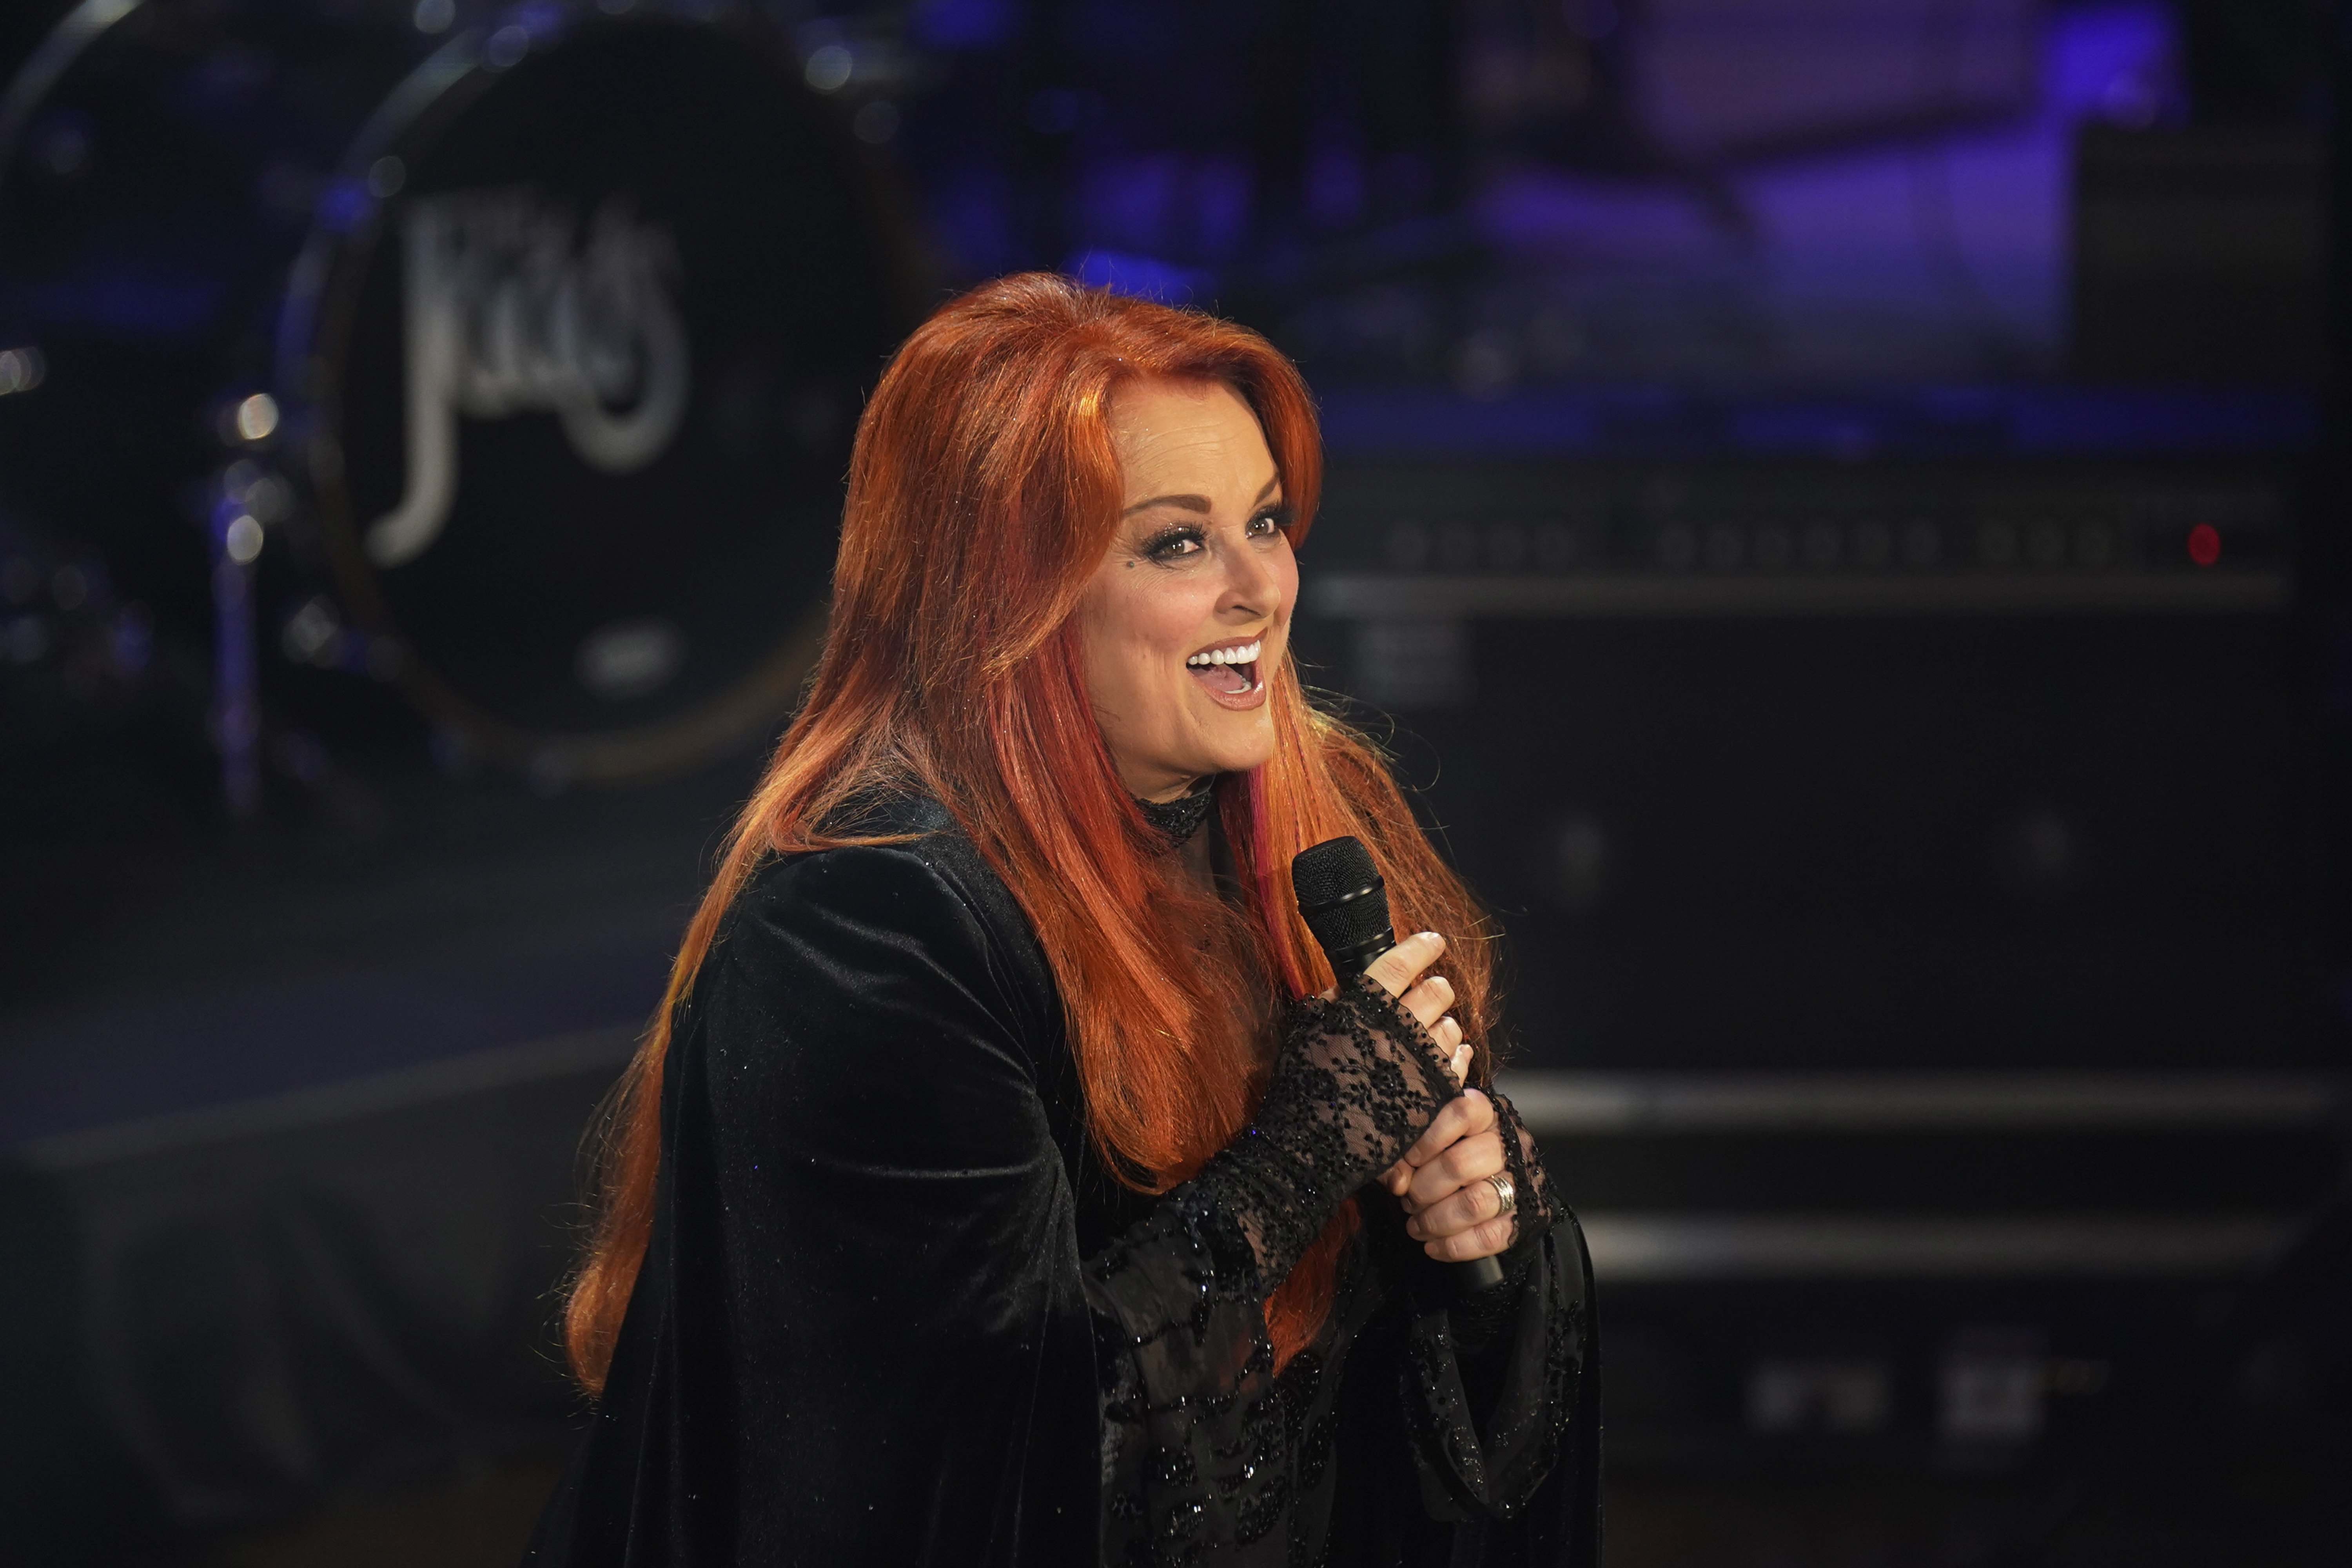 Wynonna Judd performs during Naomi Judd: 'A River Of Time' Celebration on May 15, 2022 in Nashville, Tennessee. | Source: Getty Images